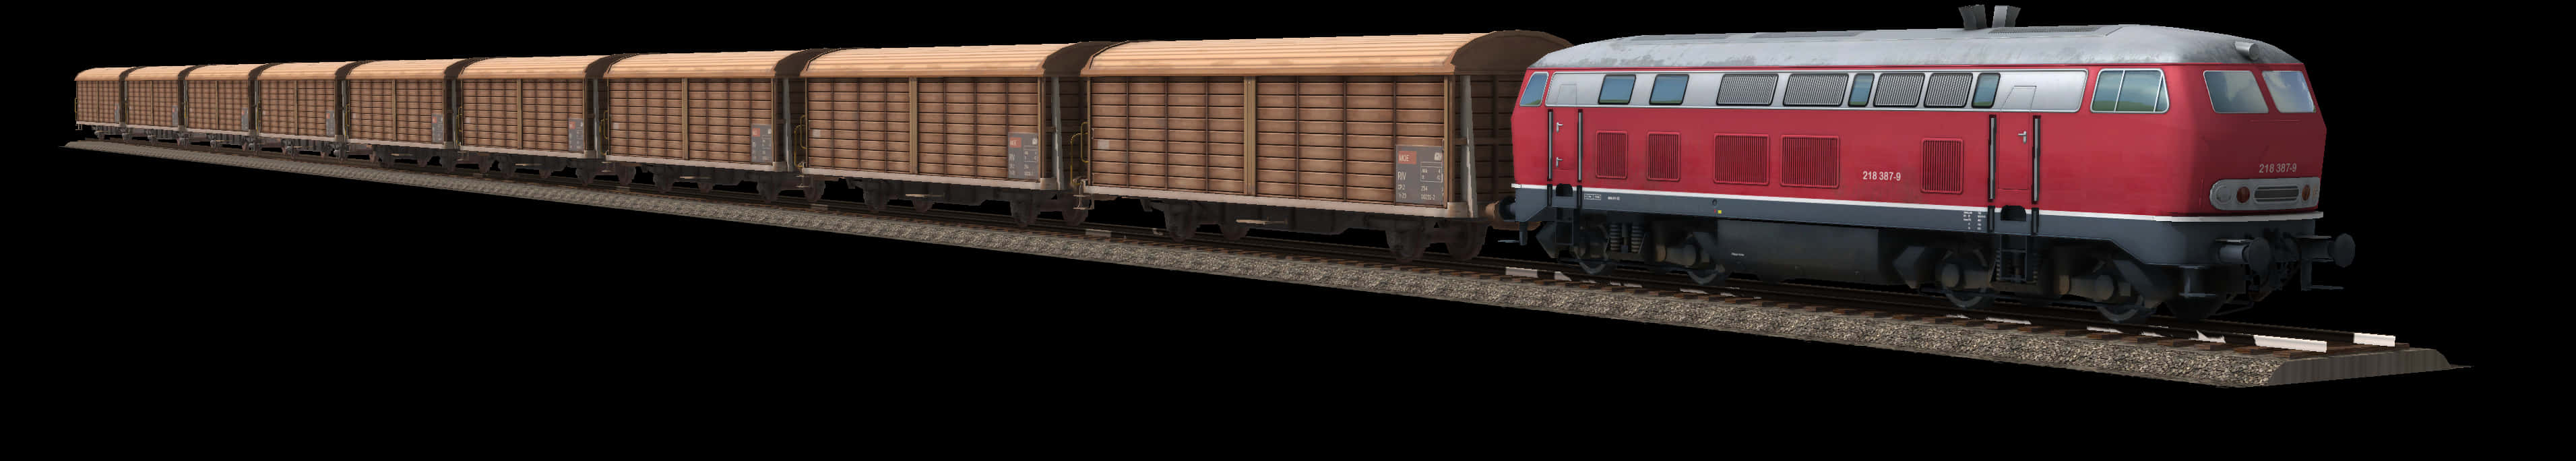 Freight_ Train_at_ Night PNG image